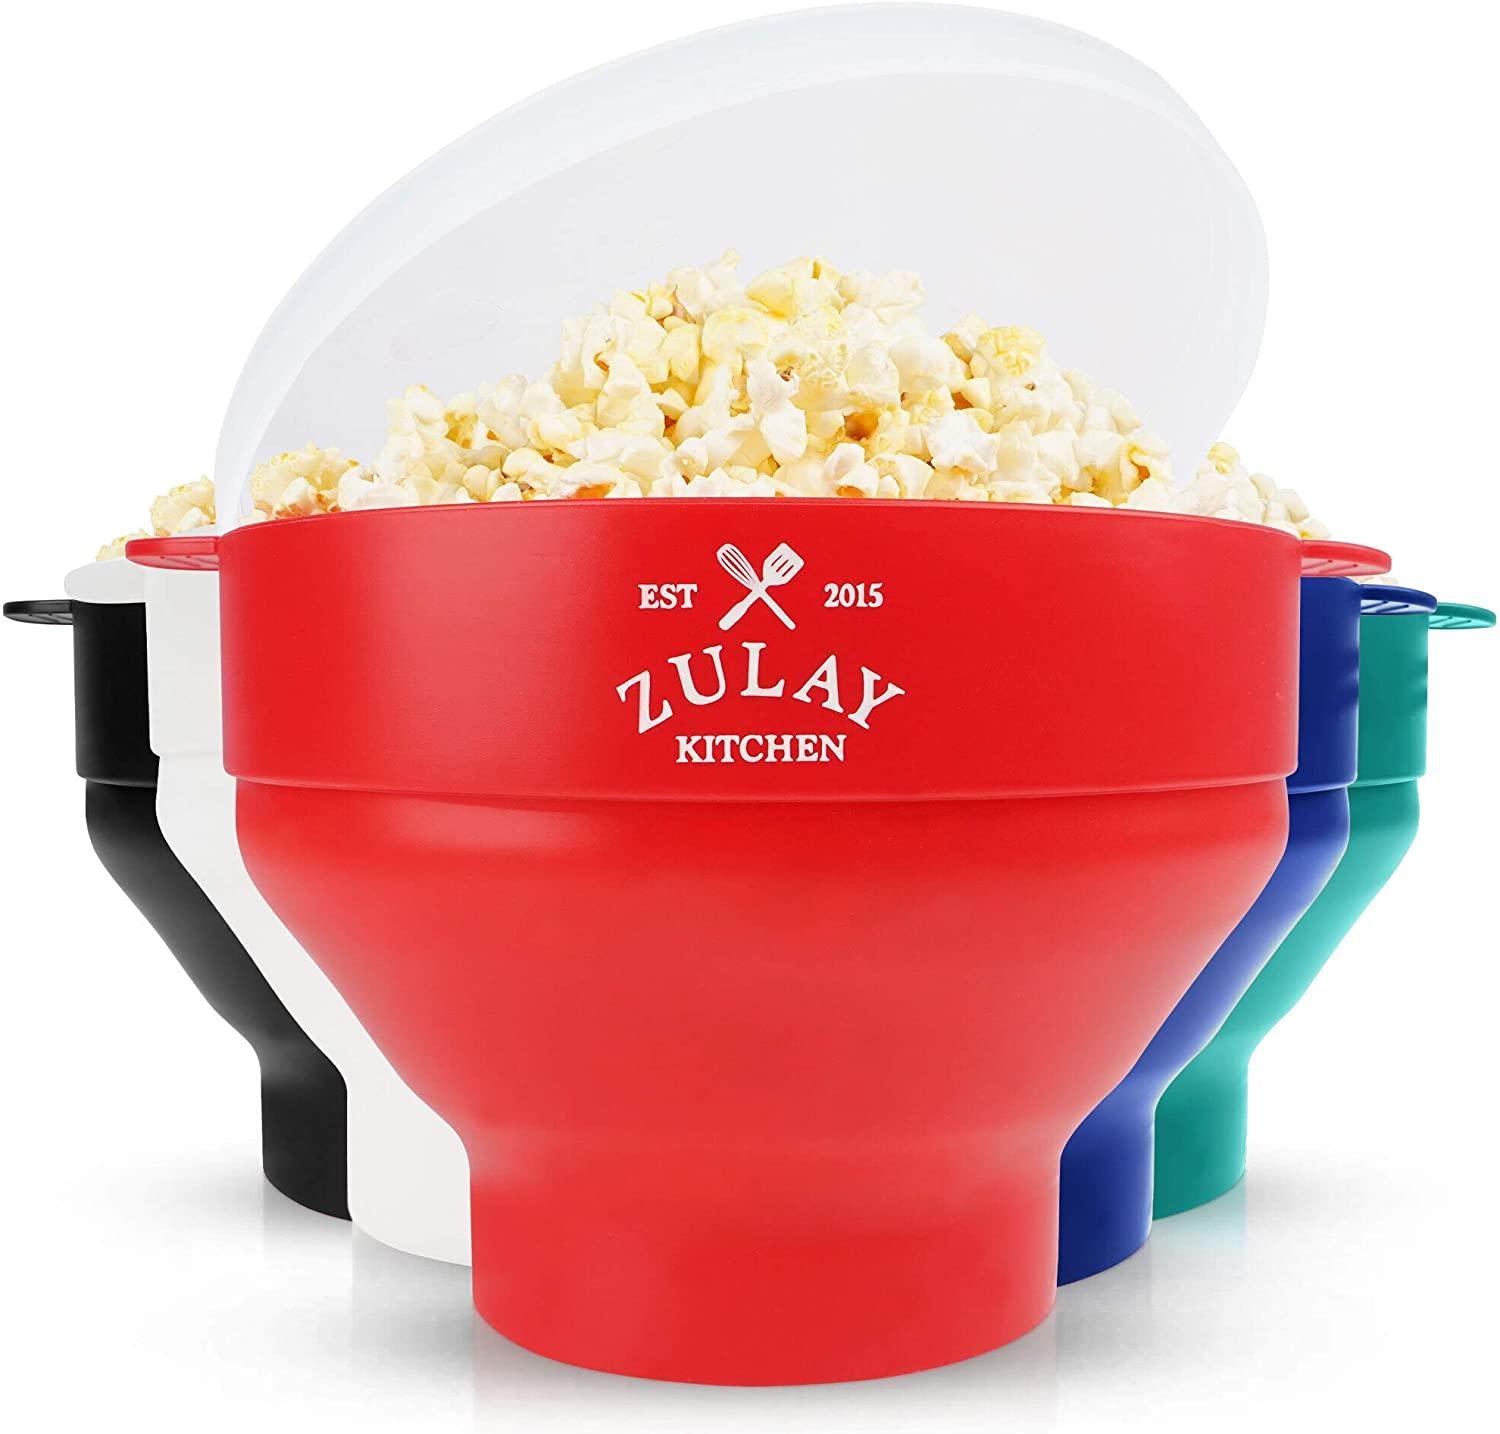 Collapsible Microwave Popcorn Popper - Lemon Drop Gifts